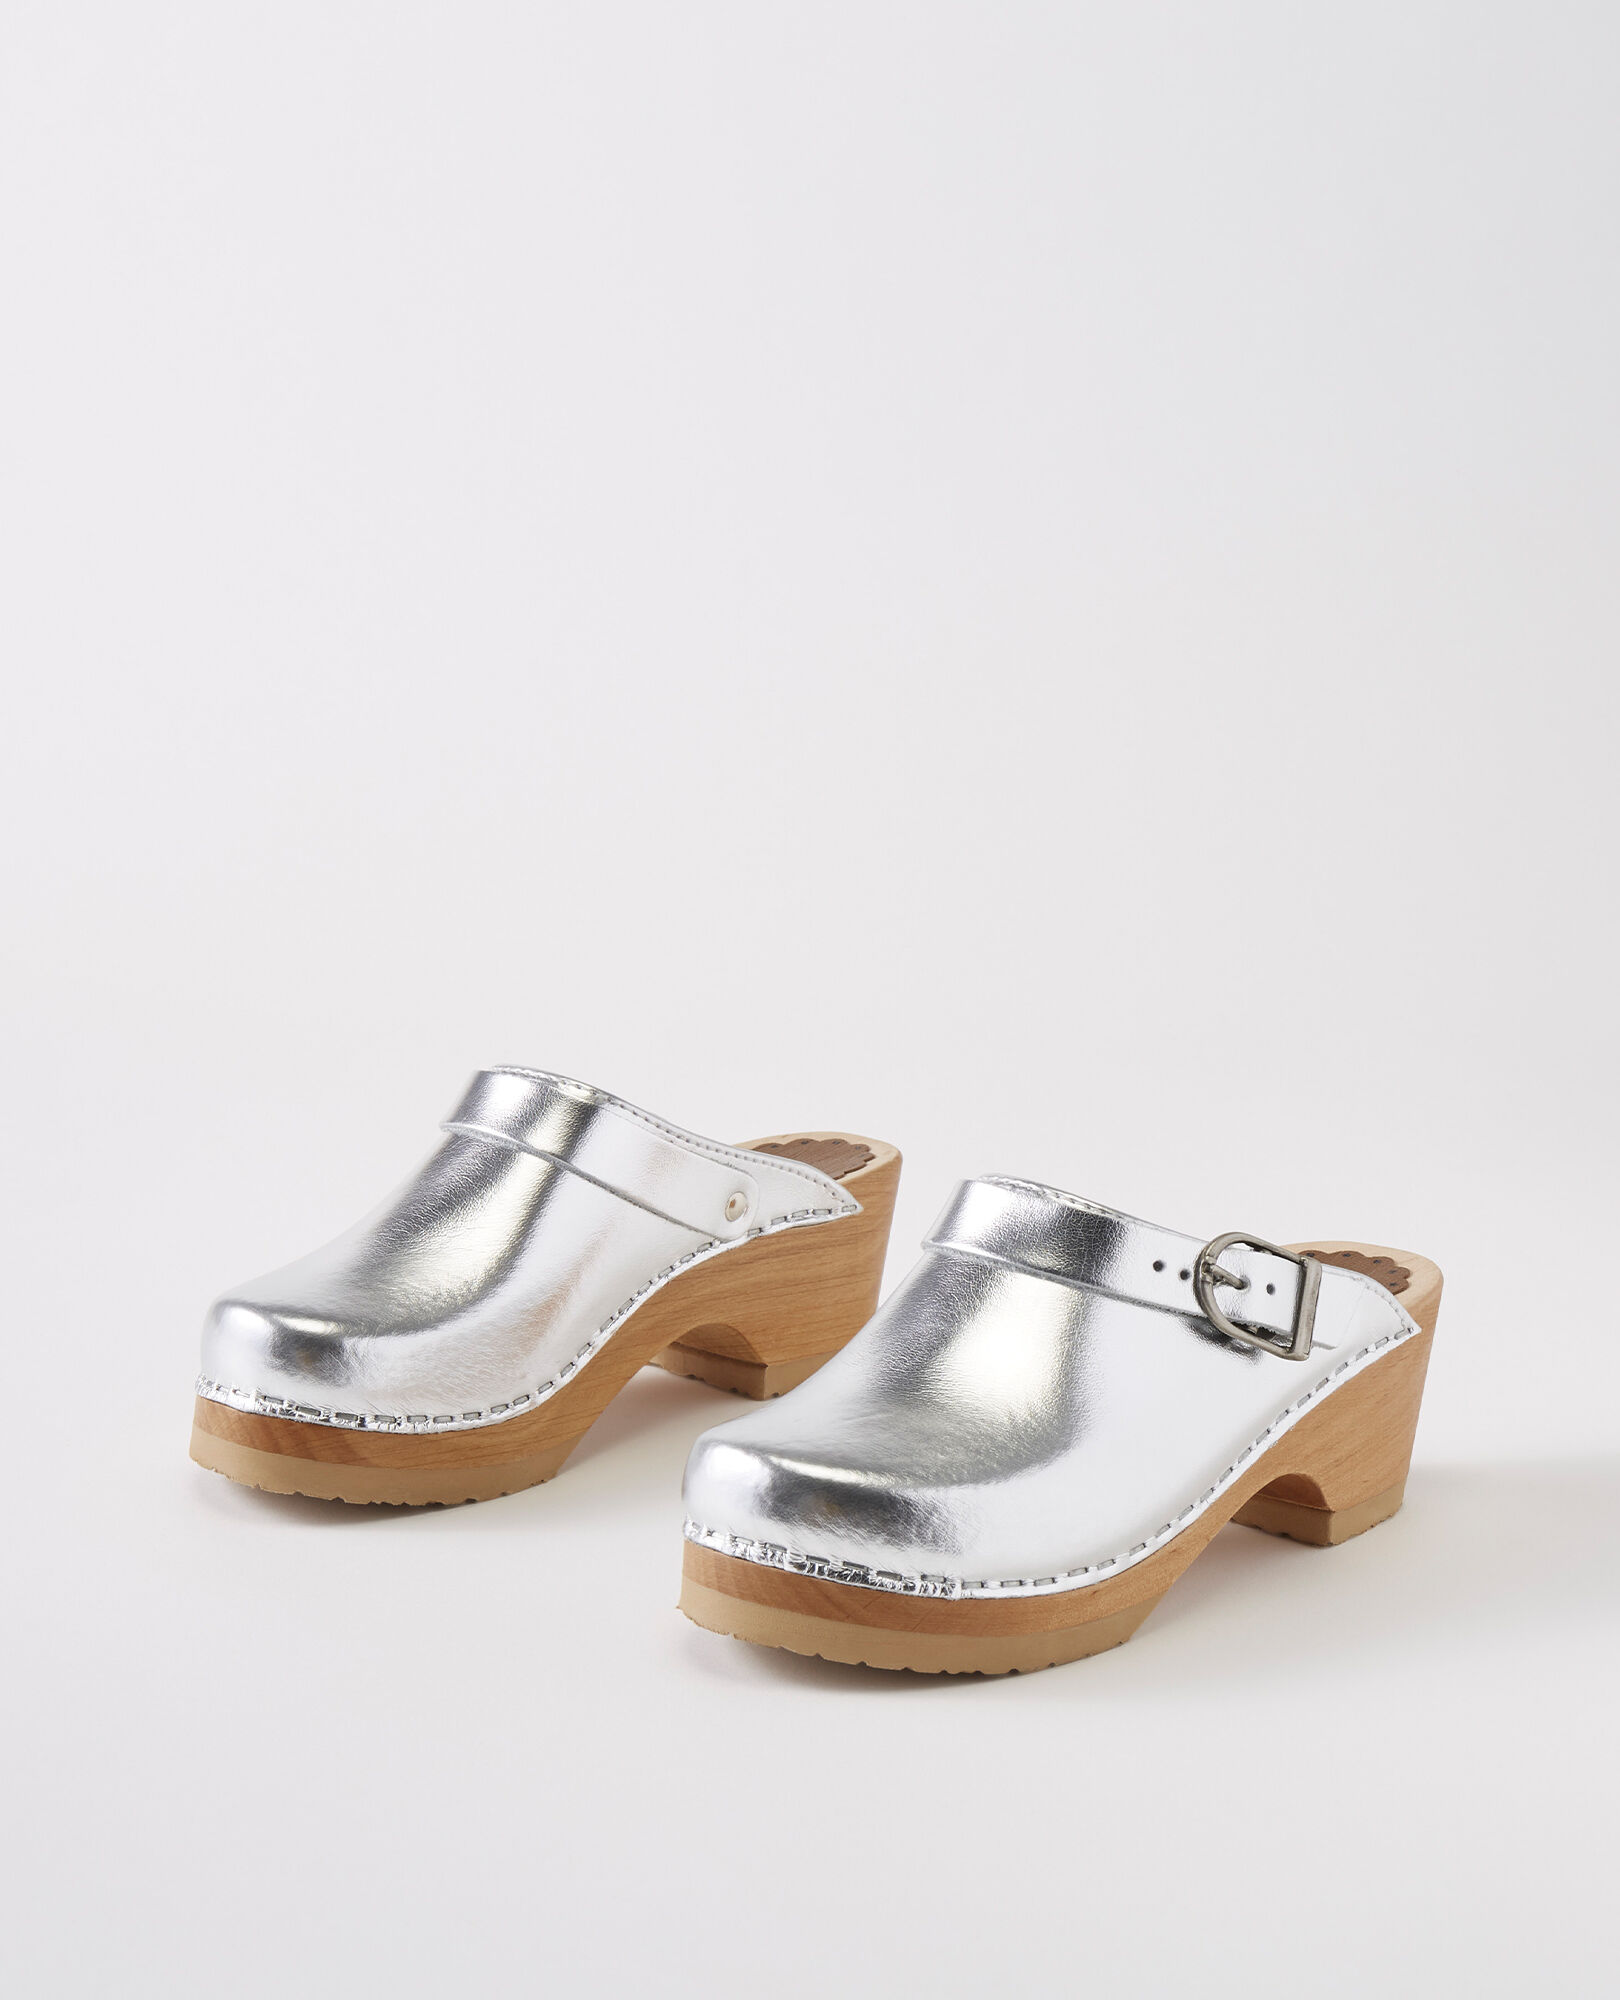 hanna andersson clogs